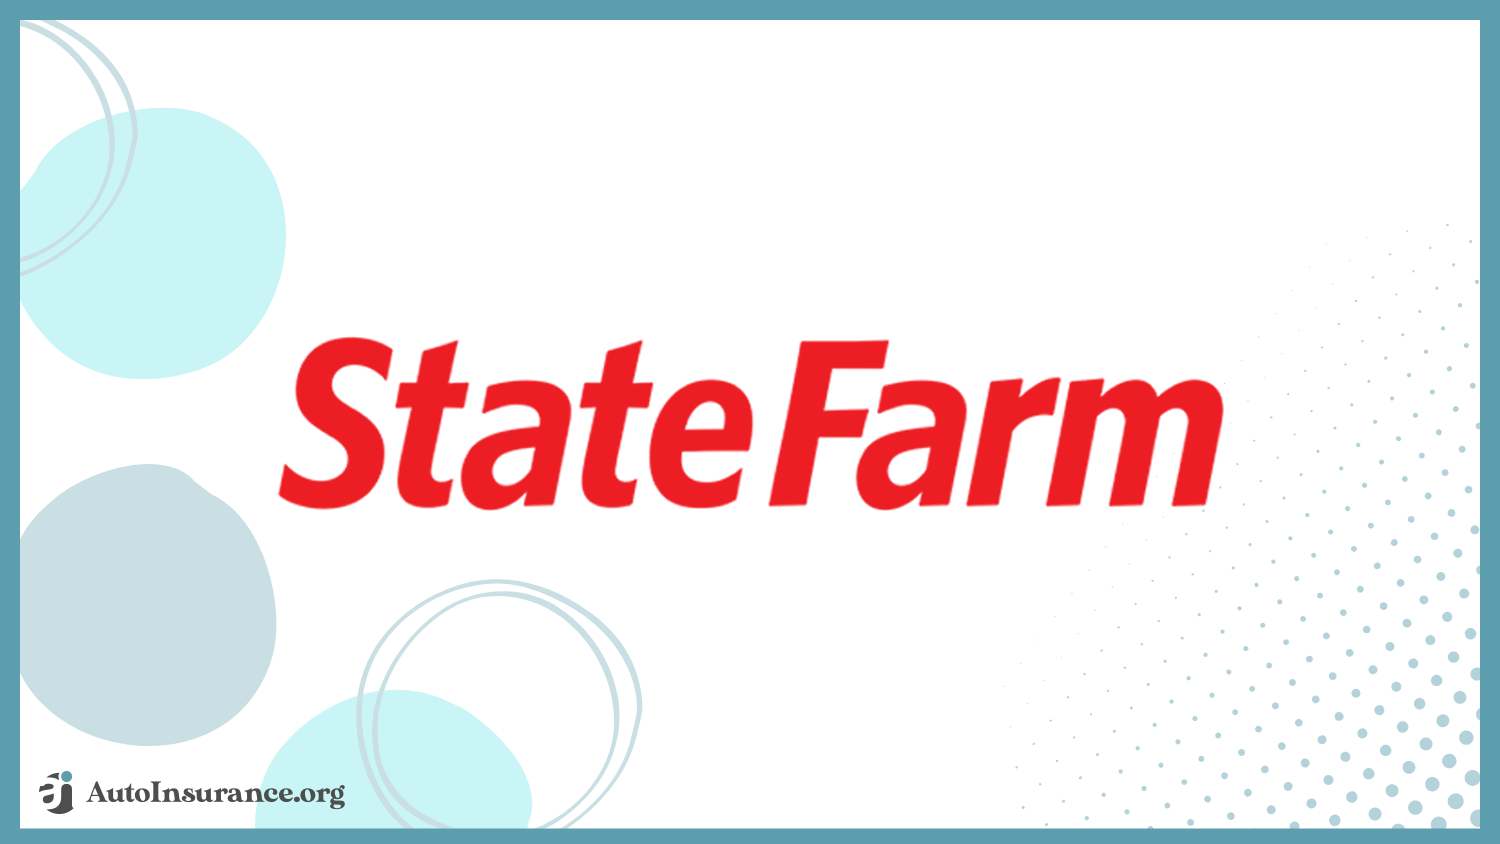 State Farm: Best Auto Insurance for Single Adults